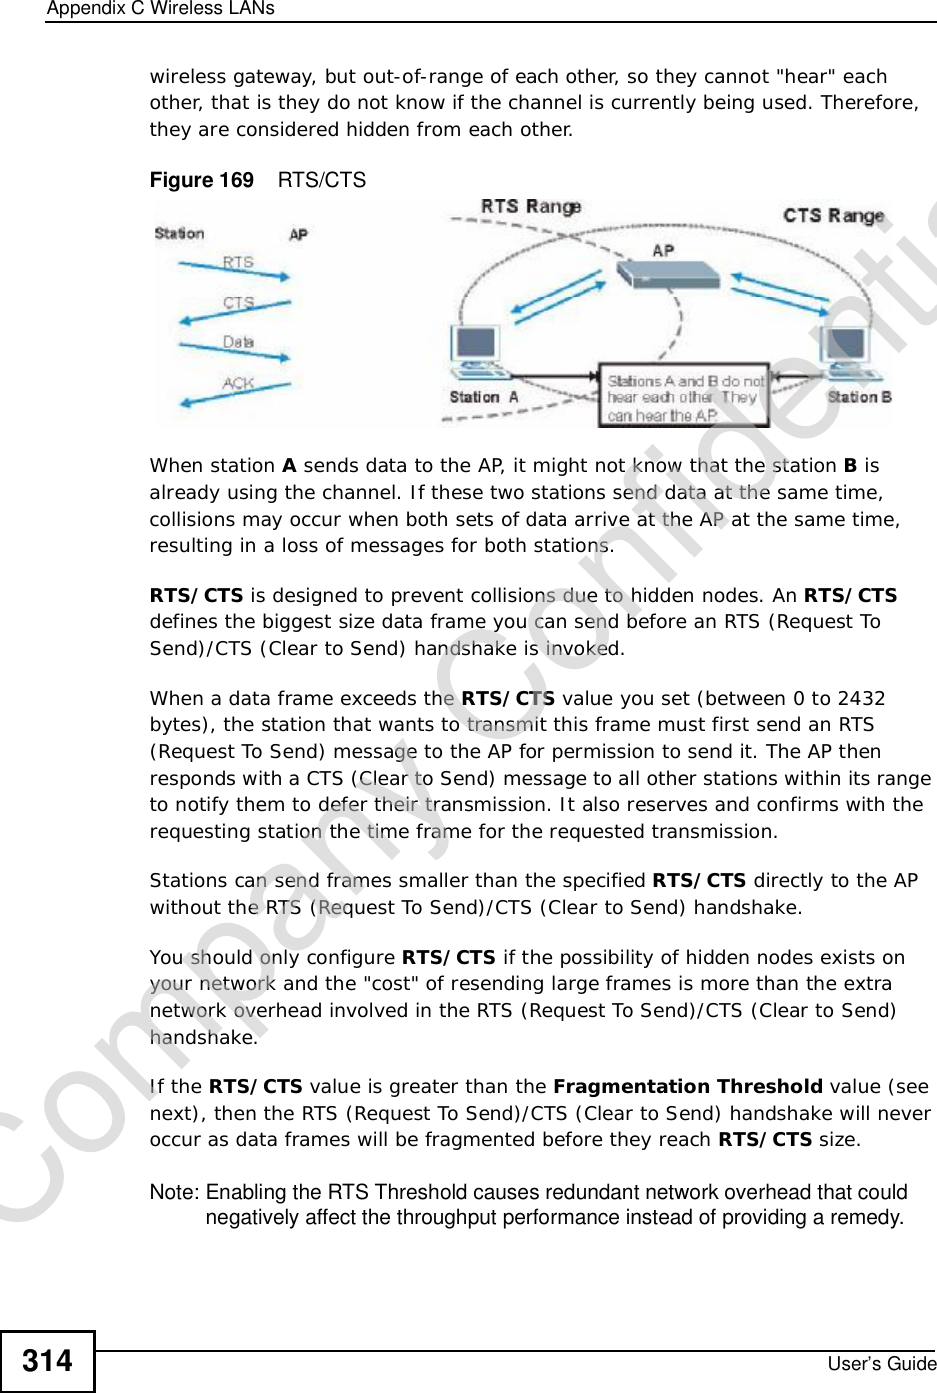 Appendix CWireless LANsUser’s Guide314wireless gateway, but out-of-range of each other, so they cannot &quot;hear&quot; each other, that is they do not know if the channel is currently being used. Therefore, they are considered hidden from each other. Figure 169    RTS/CTSWhen station A sends data to the AP, it might not know that the station B is already using the channel. If these two stations send data at the same time, collisions may occur when both sets of data arrive at the AP at the same time, resulting in a loss of messages for both stations.RTS/CTS is designed to prevent collisions due to hidden nodes. An RTS/CTS defines the biggest size data frame you can send before an RTS (Request To Send)/CTS (Clear to Send) handshake is invoked.When a data frame exceeds the RTS/CTS value you set (between 0 to 2432 bytes), the station that wants to transmit this frame must first send an RTS (Request To Send) message to the AP for permission to send it. The AP then responds with a CTS (Clear to Send) message to all other stations within its range to notify them to defer their transmission. It also reserves and confirms with the requesting station the time frame for the requested transmission.Stations can send frames smaller than the specified RTS/CTS directly to the AP without the RTS (Request To Send)/CTS (Clear to Send) handshake. You should only configure RTS/CTS if the possibility of hidden nodes exists on your network and the &quot;cost&quot; of resending large frames is more than the extra network overhead involved in the RTS (Request To Send)/CTS (Clear to Send) handshake. If the RTS/CTS value is greater than the Fragmentation Threshold value (see next), then the RTS (Request To Send)/CTS (Clear to Send) handshake will never occur as data frames will be fragmented before they reach RTS/CTS size. Note: Enabling the RTS Threshold causes redundant network overhead that could negatively affect the throughput performance instead of providing a remedy.Company Confidential